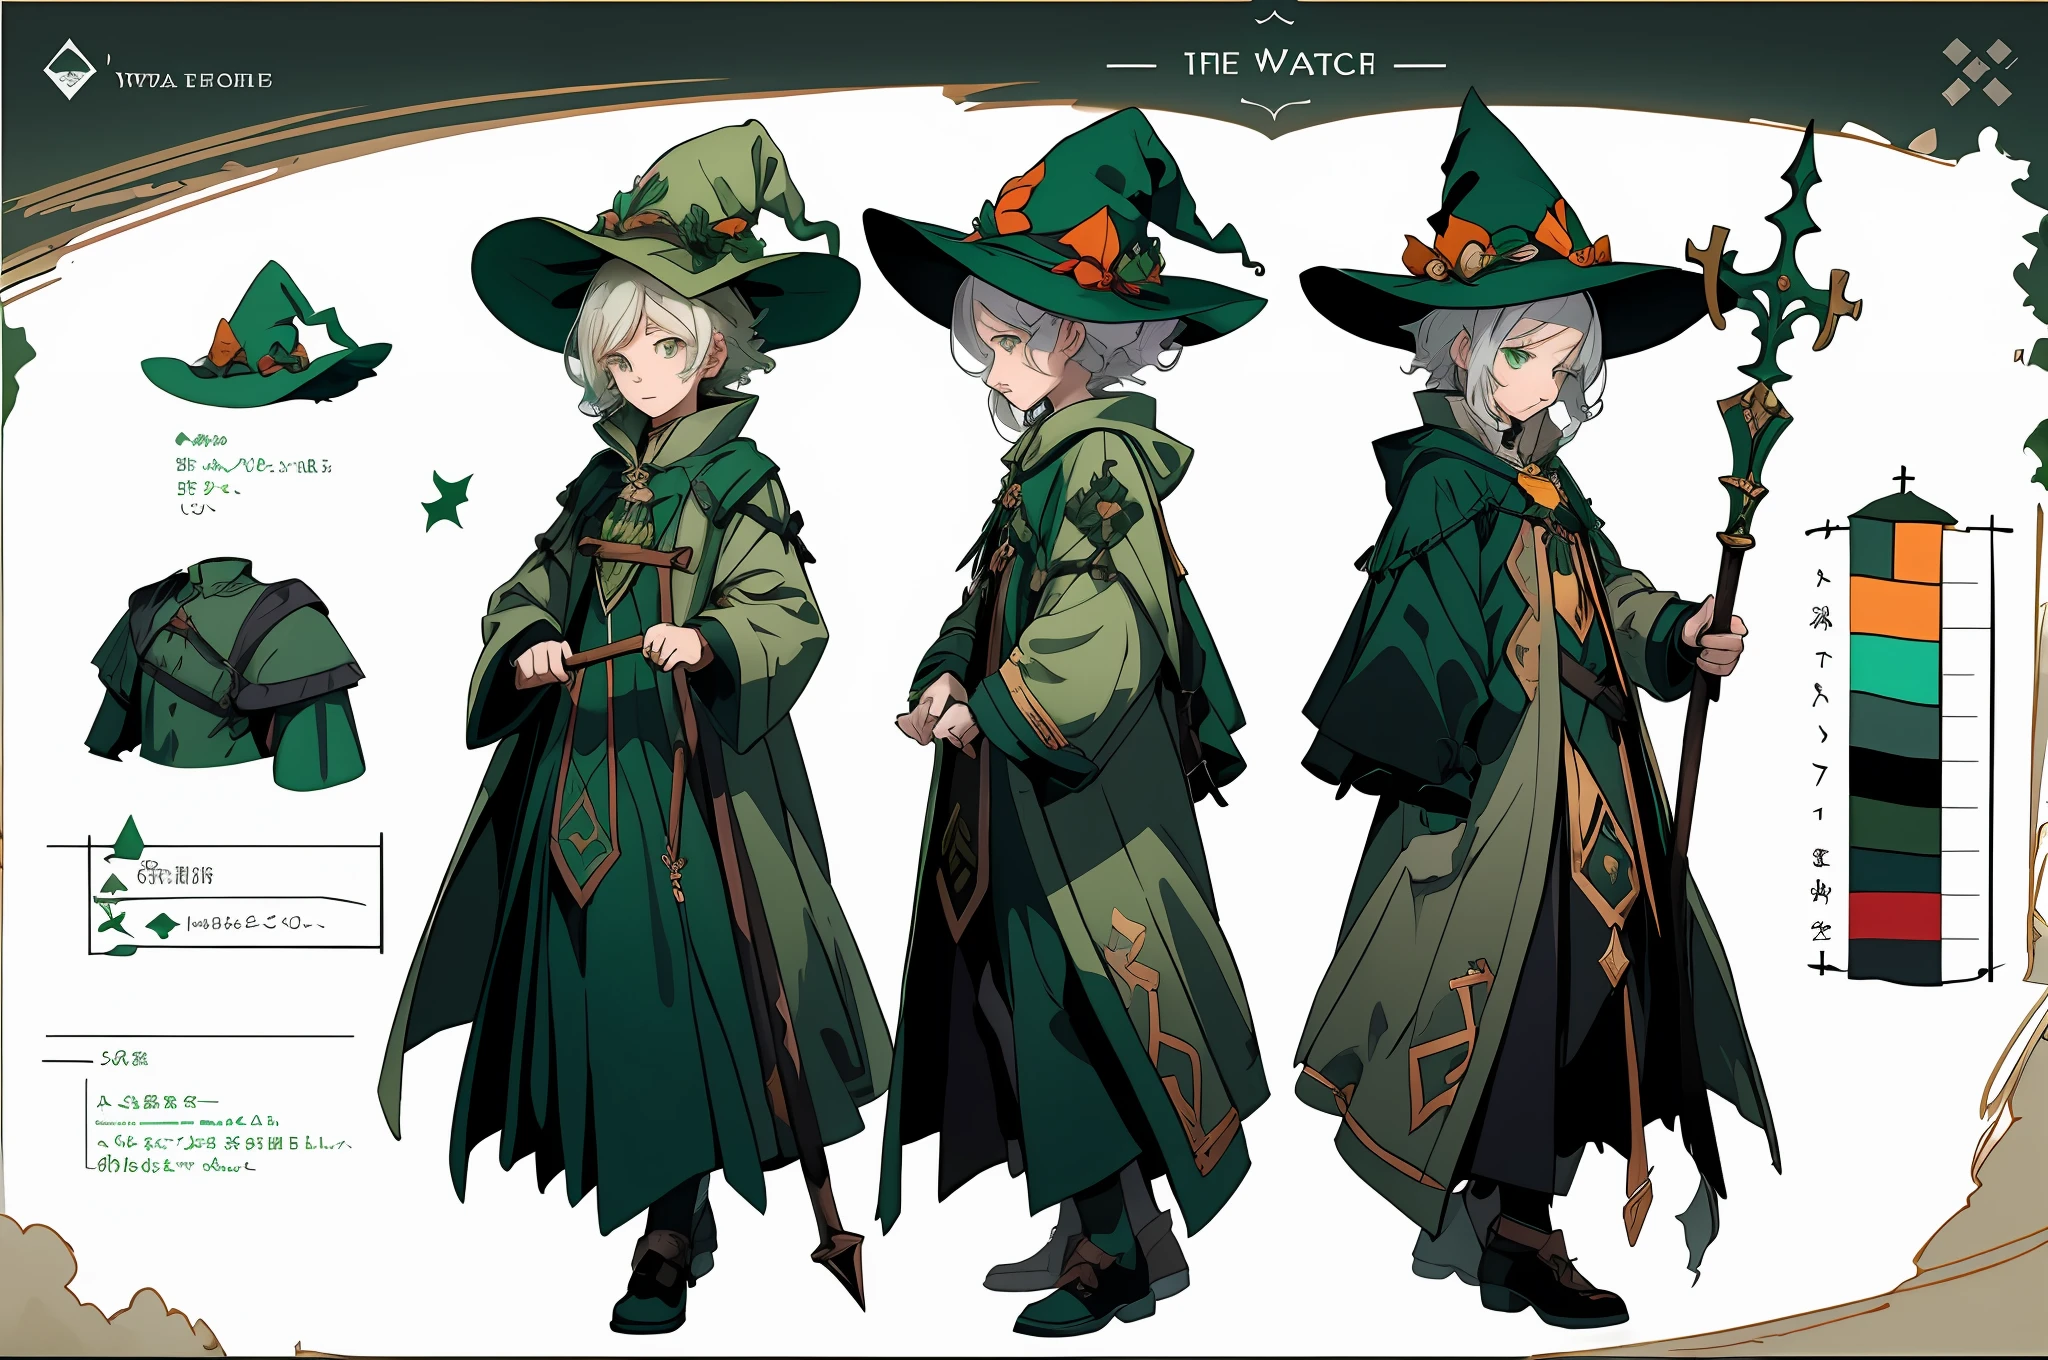 Blonde woman in green dress and hat holding a scythe, classic witch, green witch walking her garden, as a medieval fantasy character, middle-aged witch, wearing a green coat, with a green coat, dressed in a green coat, medieval dress. witch, a witch, dressed in a green dress, classic witch dress, witch fairy tale, witch woman .monochrome, , concept art,
Yoimiyadef